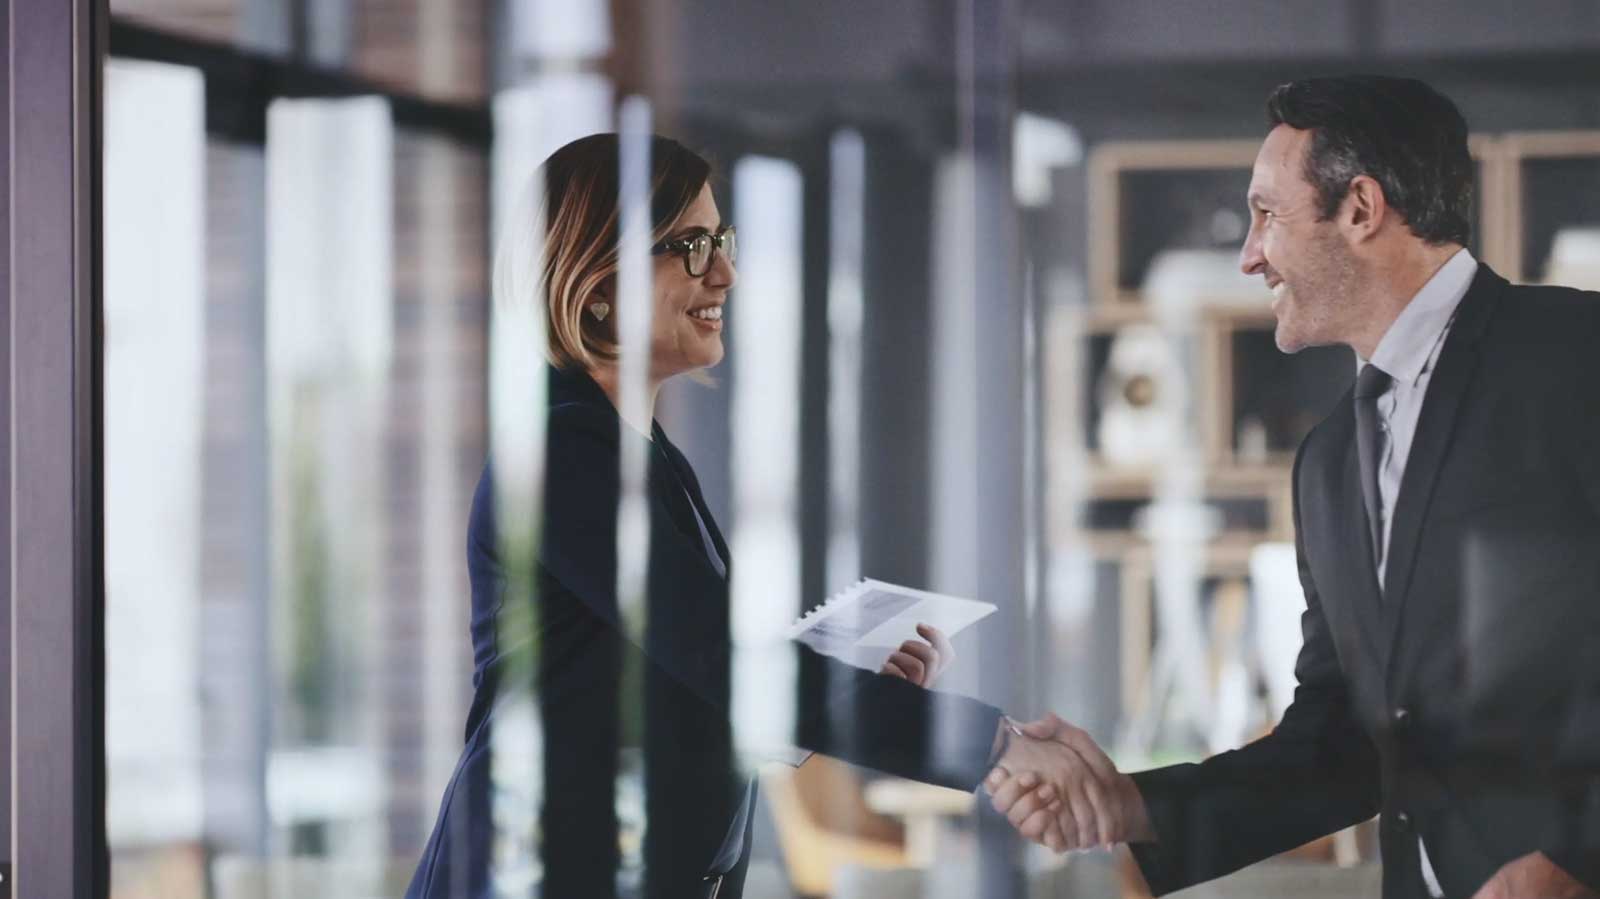 A business woman and business man exchanging a handshake in an office.